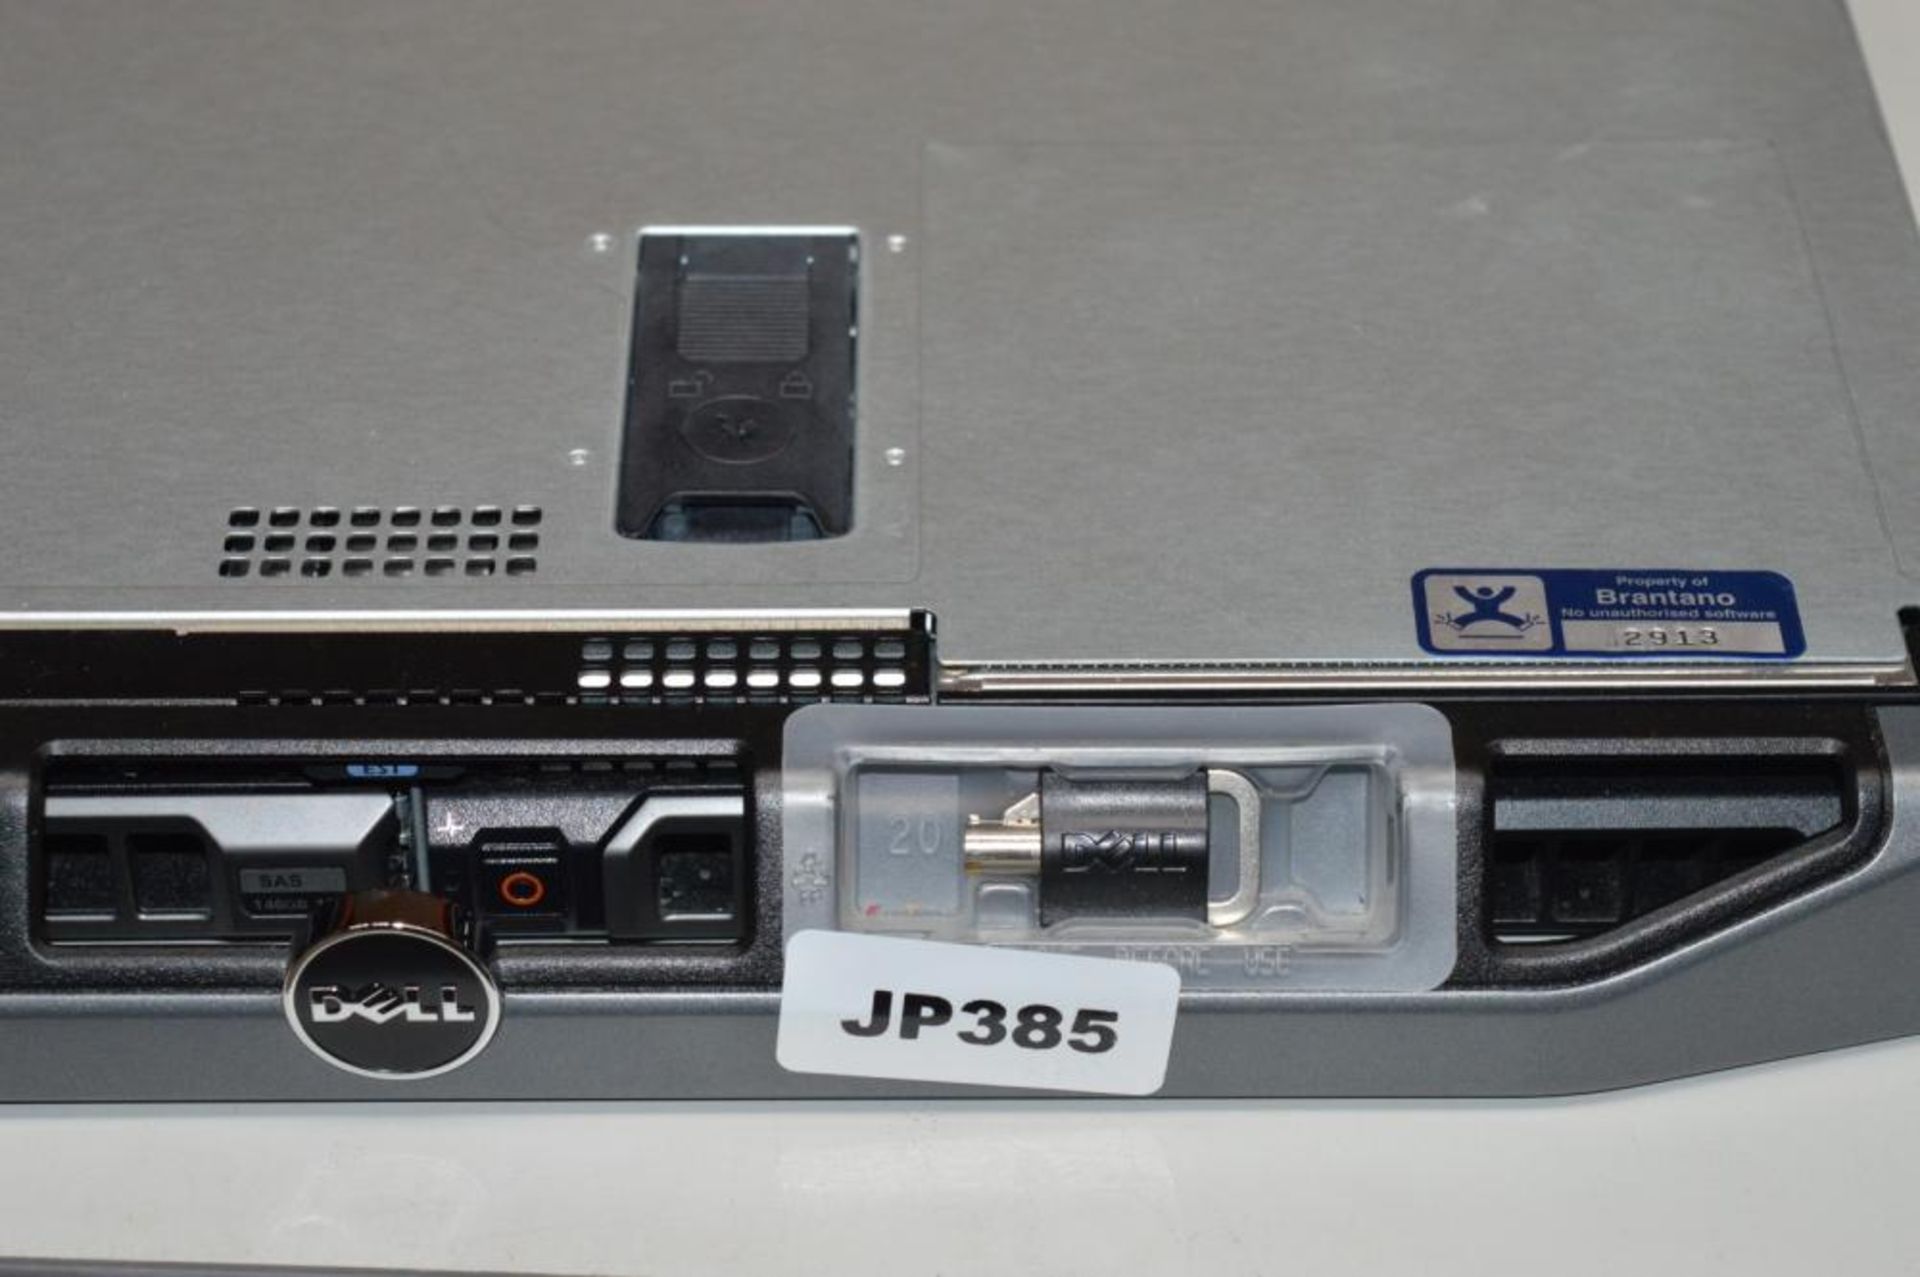 1 x Dell PowerEdge R320 Rack Mount Server - Features Intel Xeon E5-2407 Quad Core Processor and 4gb - Image 2 of 5